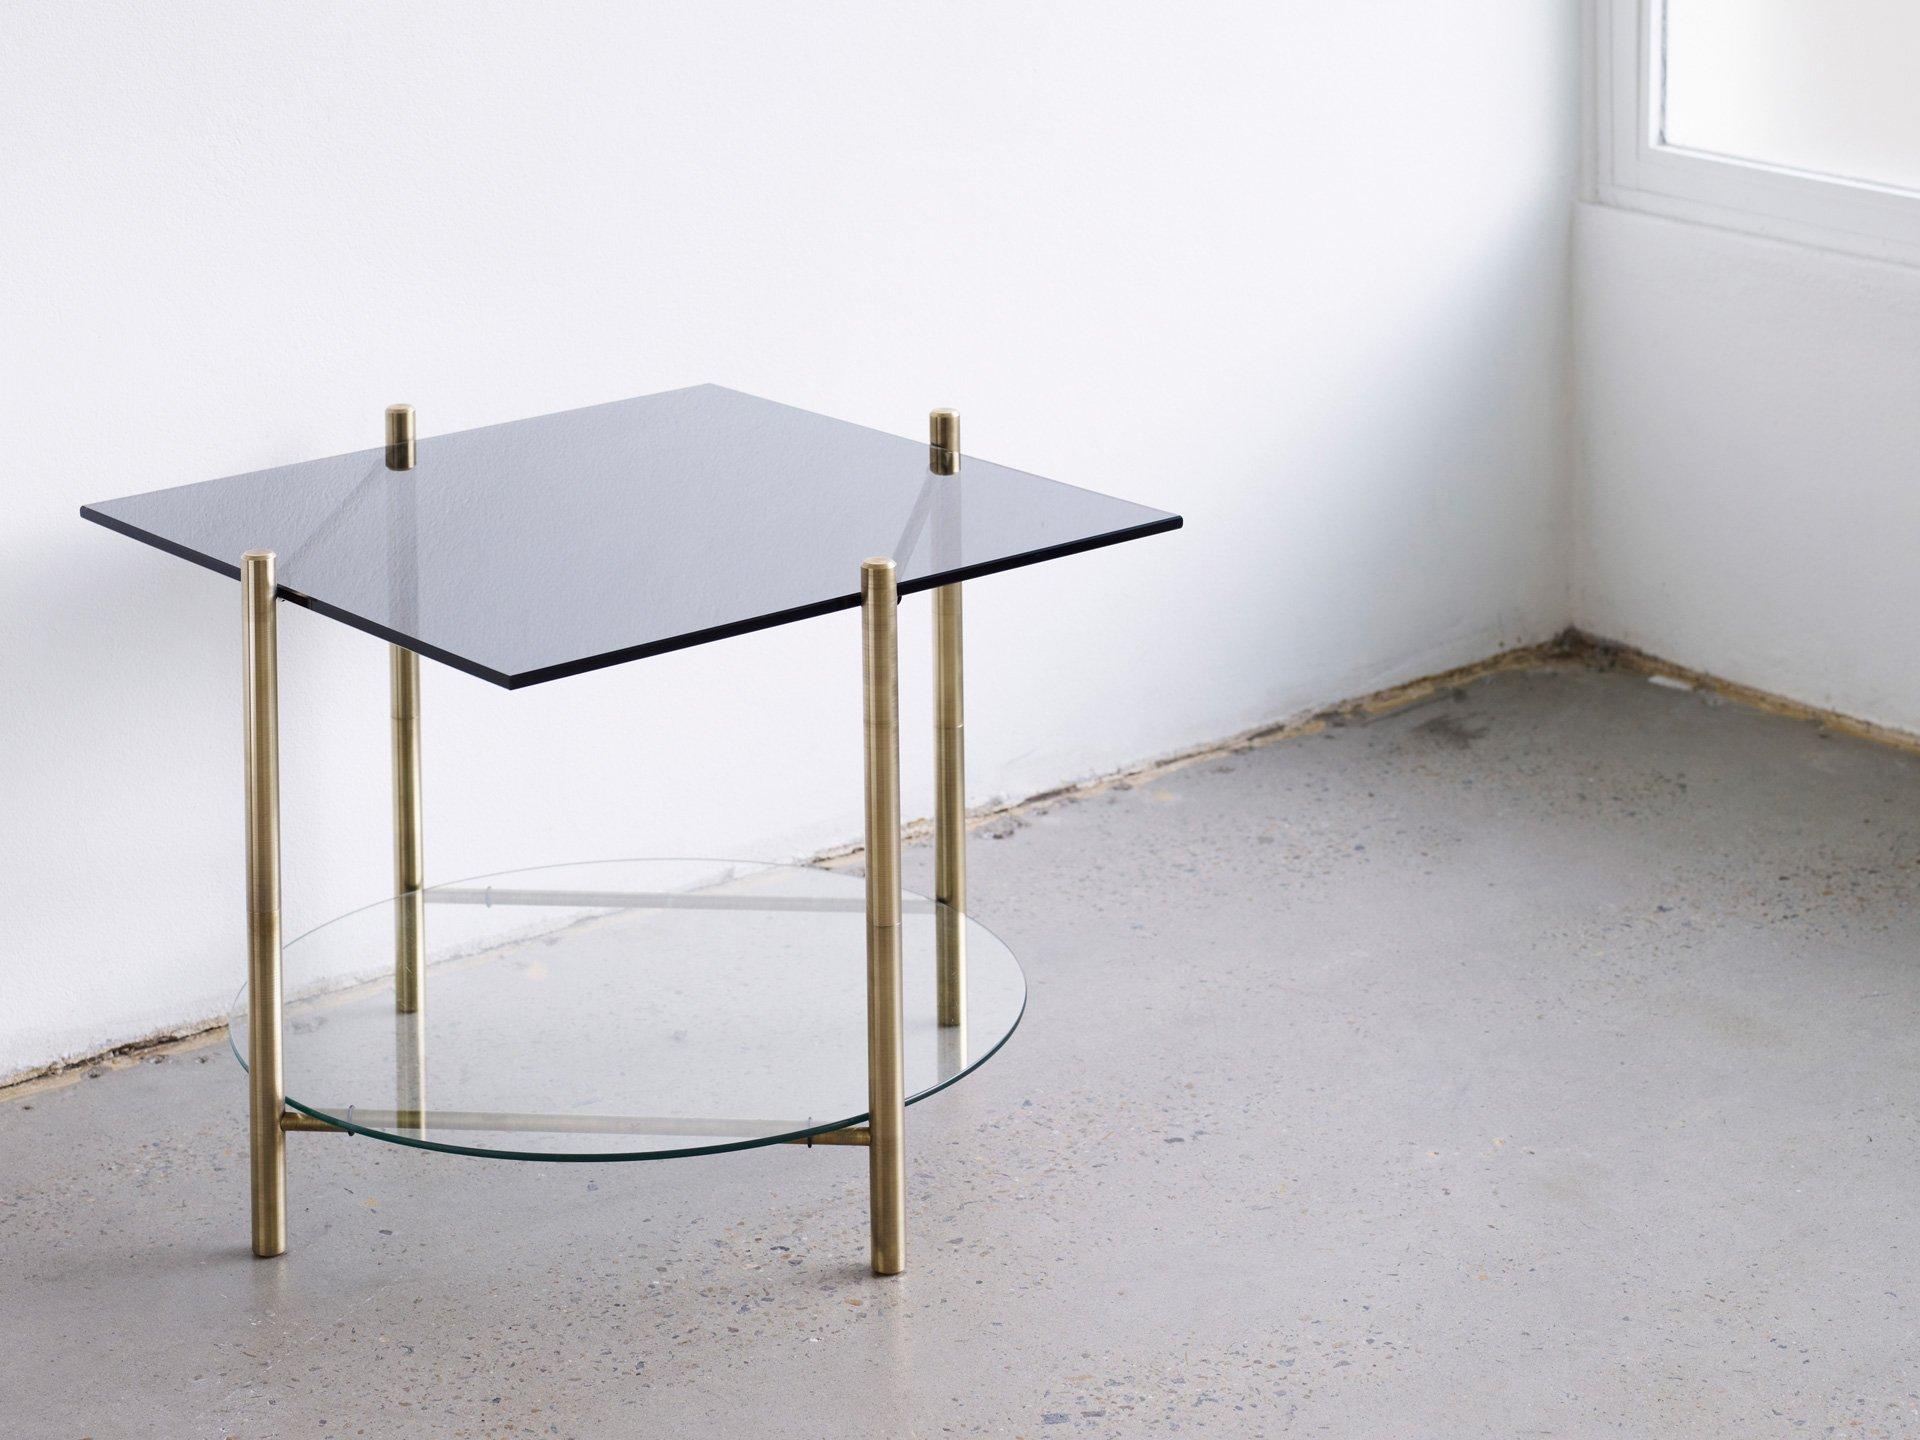 Coffee table by Henry Wilson
Square table/round table

Solid brass frame with two-tiered surfaces. All the tables are made to order in client specified materials. Some possibilities are; stone varieties, timbers, clear glass and colored glass, in